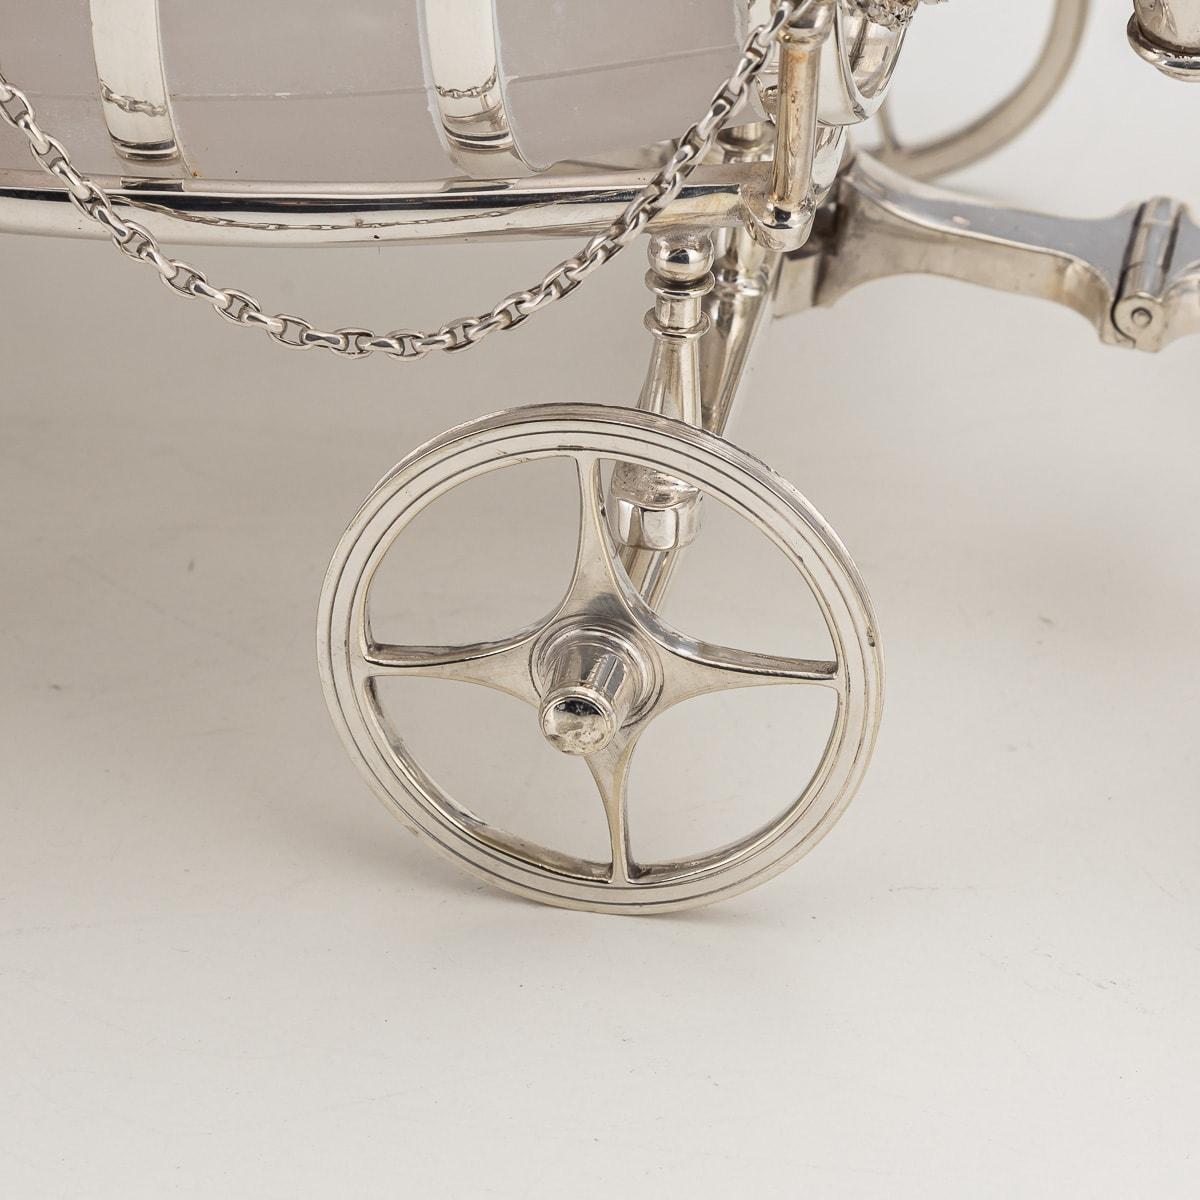 19th Century Victorian Frosted Glass & Silver Plated Spirit Barrel Cart, c.1880 For Sale 9